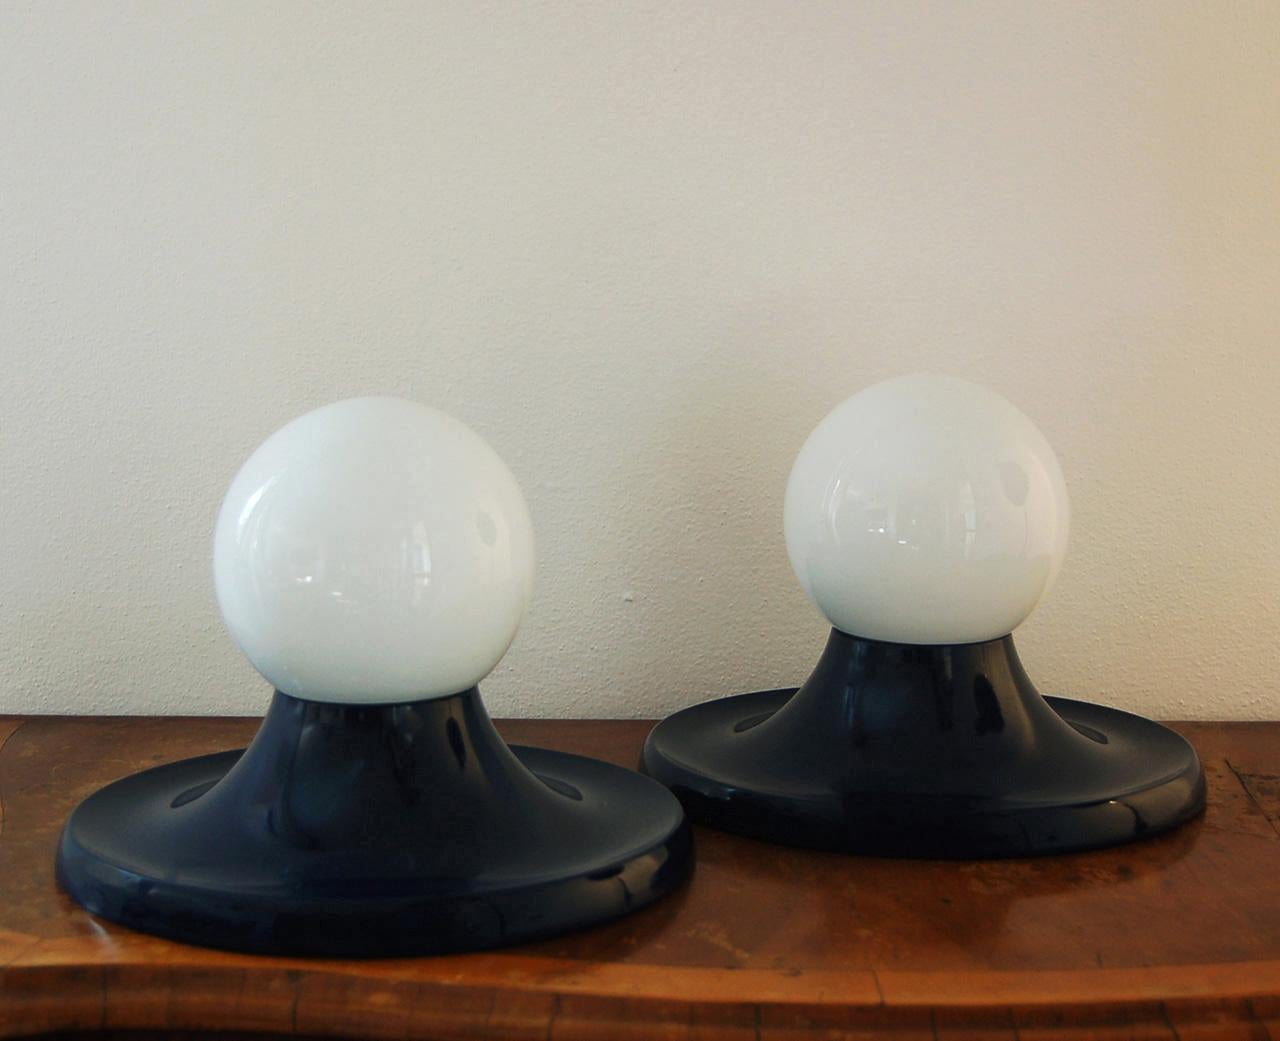 Two early edition “Light Ball 3” by the Castiglioni brothers. Well, preserved wall or ceiling lamps in a beautiful elegant blue color.
The light ball was made in three different sizes. These lamps are the intermediate model with E27 socket 100-watt